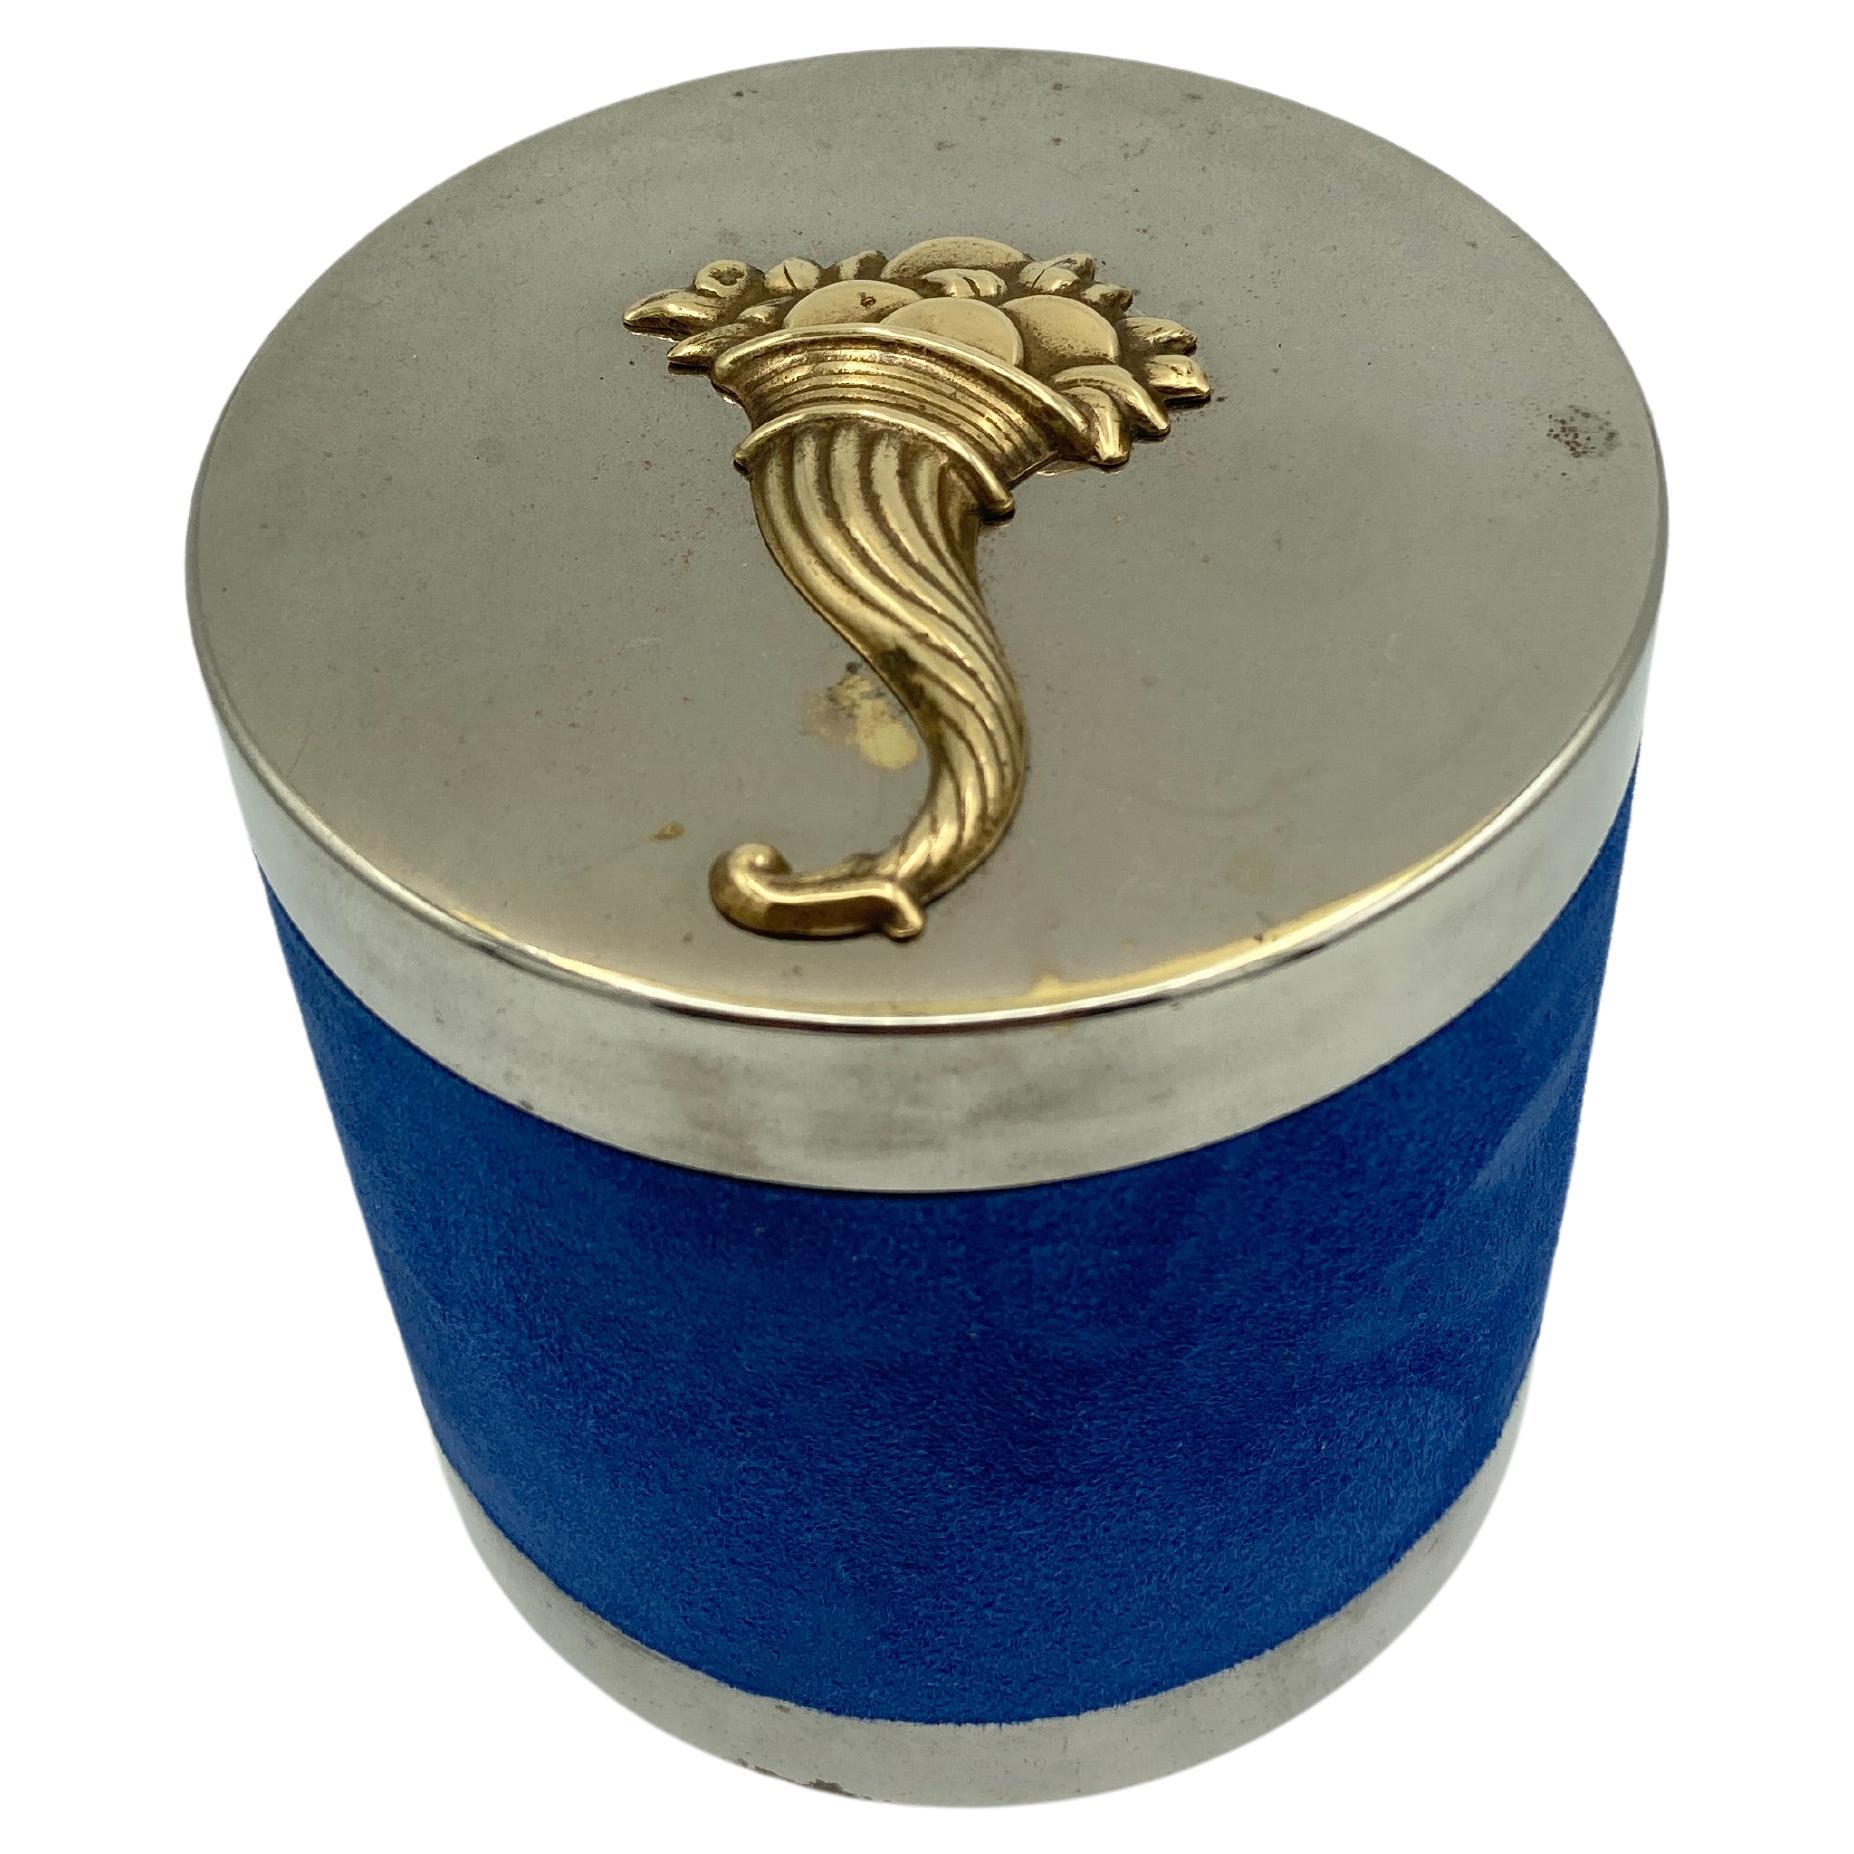 Decorative cigaret boxe covered with blue suede by Maison Hermès